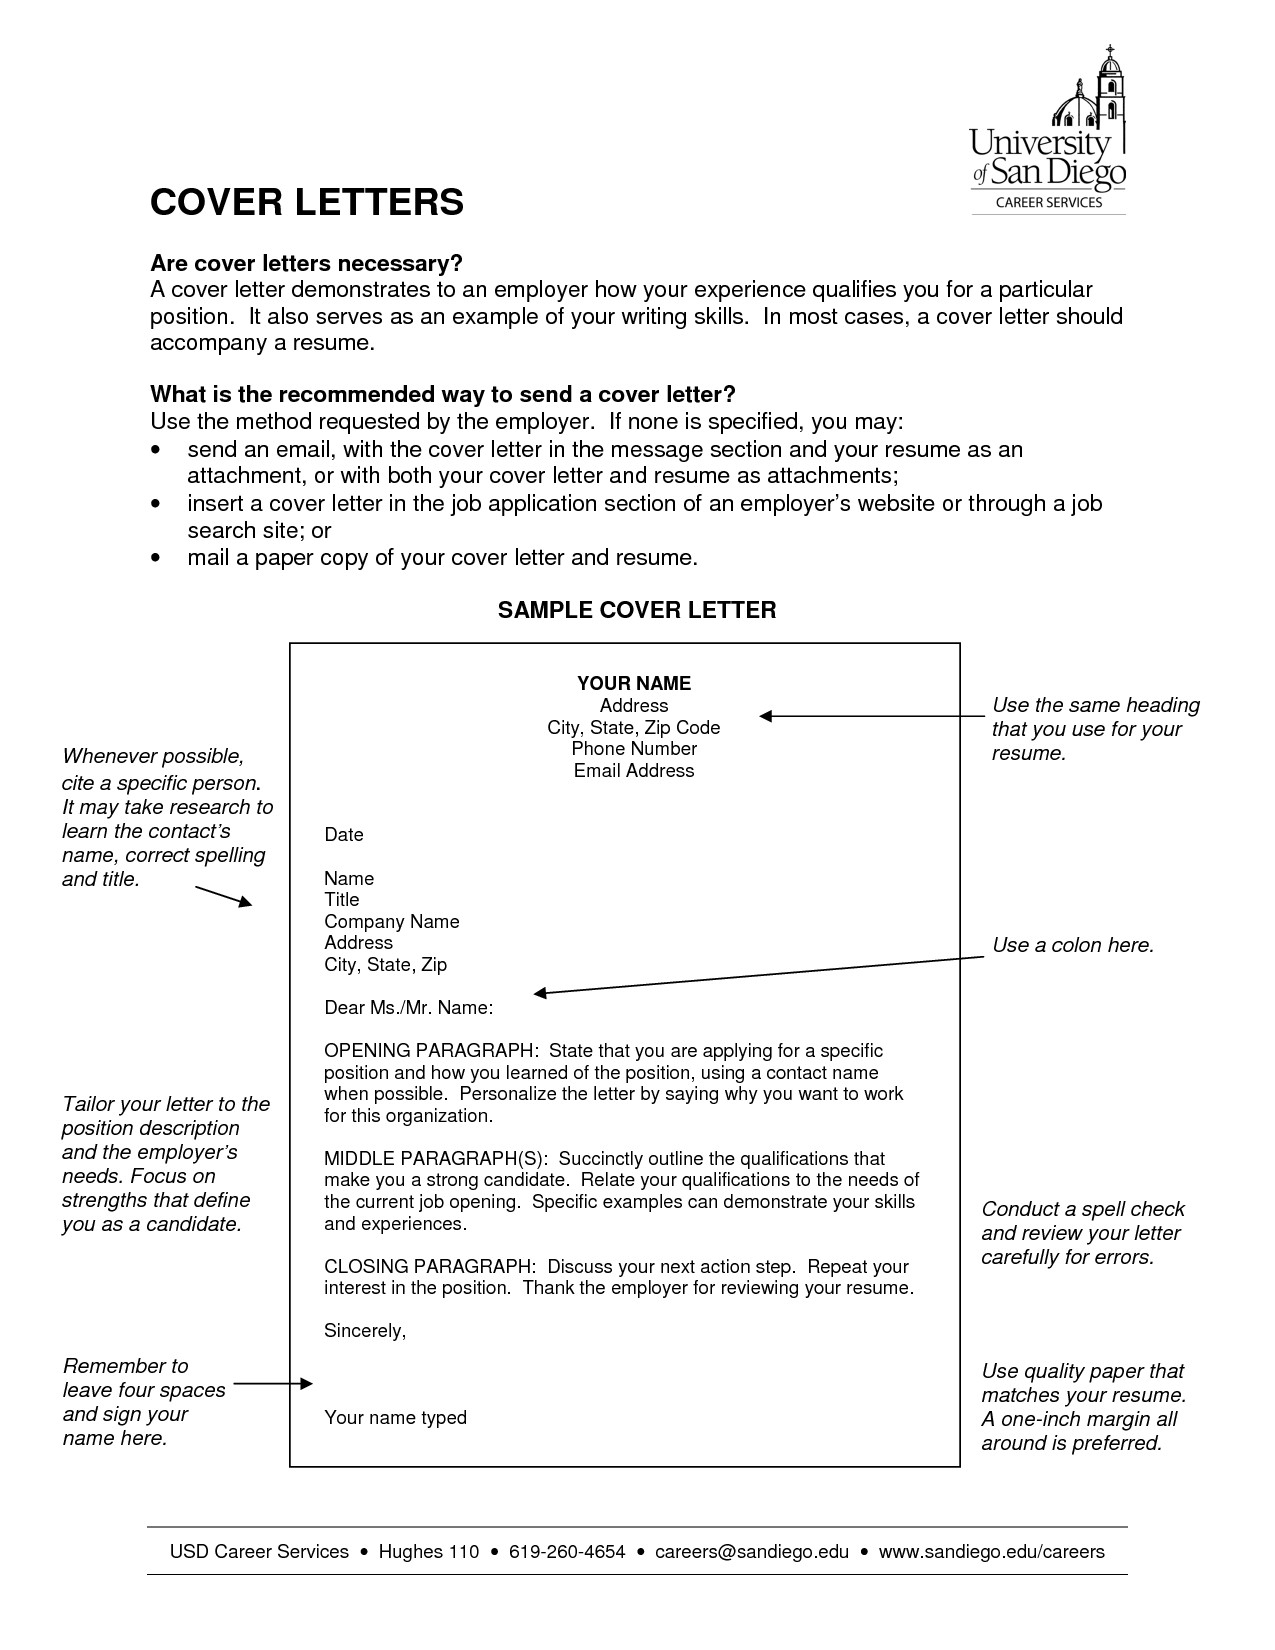 how necessary are cover letters